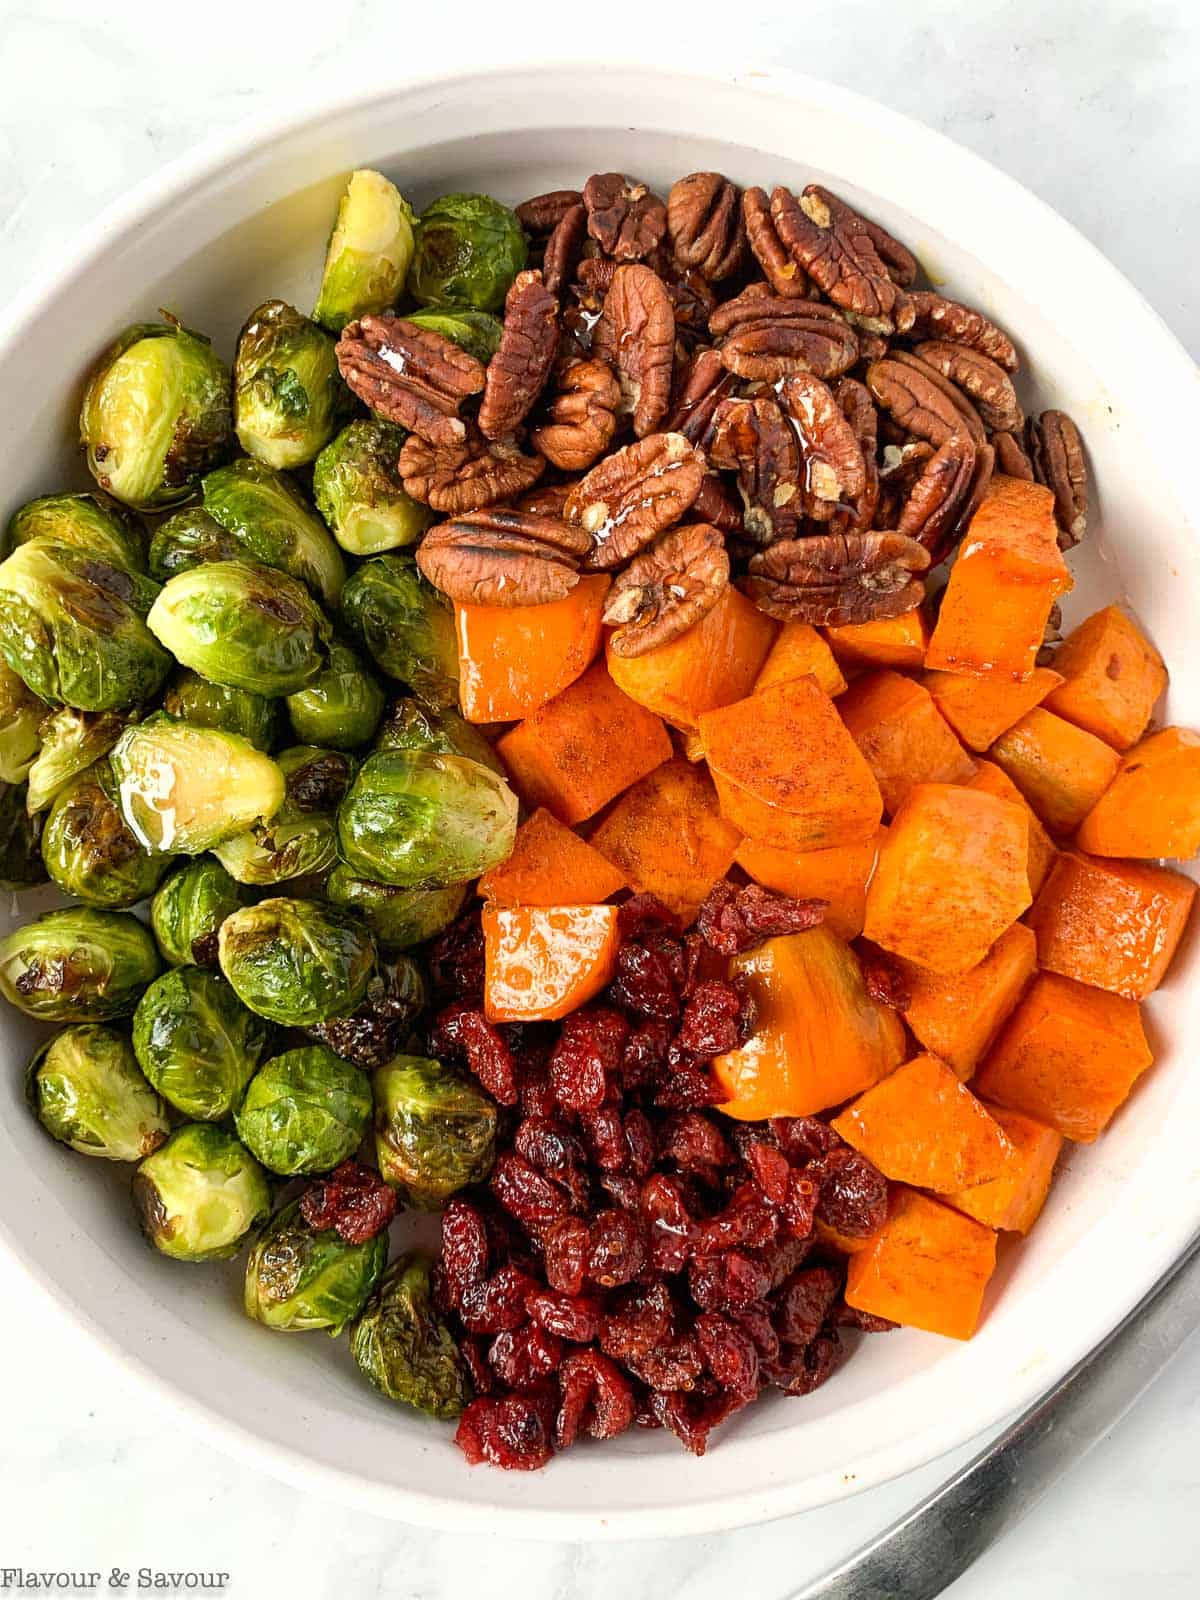 ingredients for roasted Brussels sprouts side dish